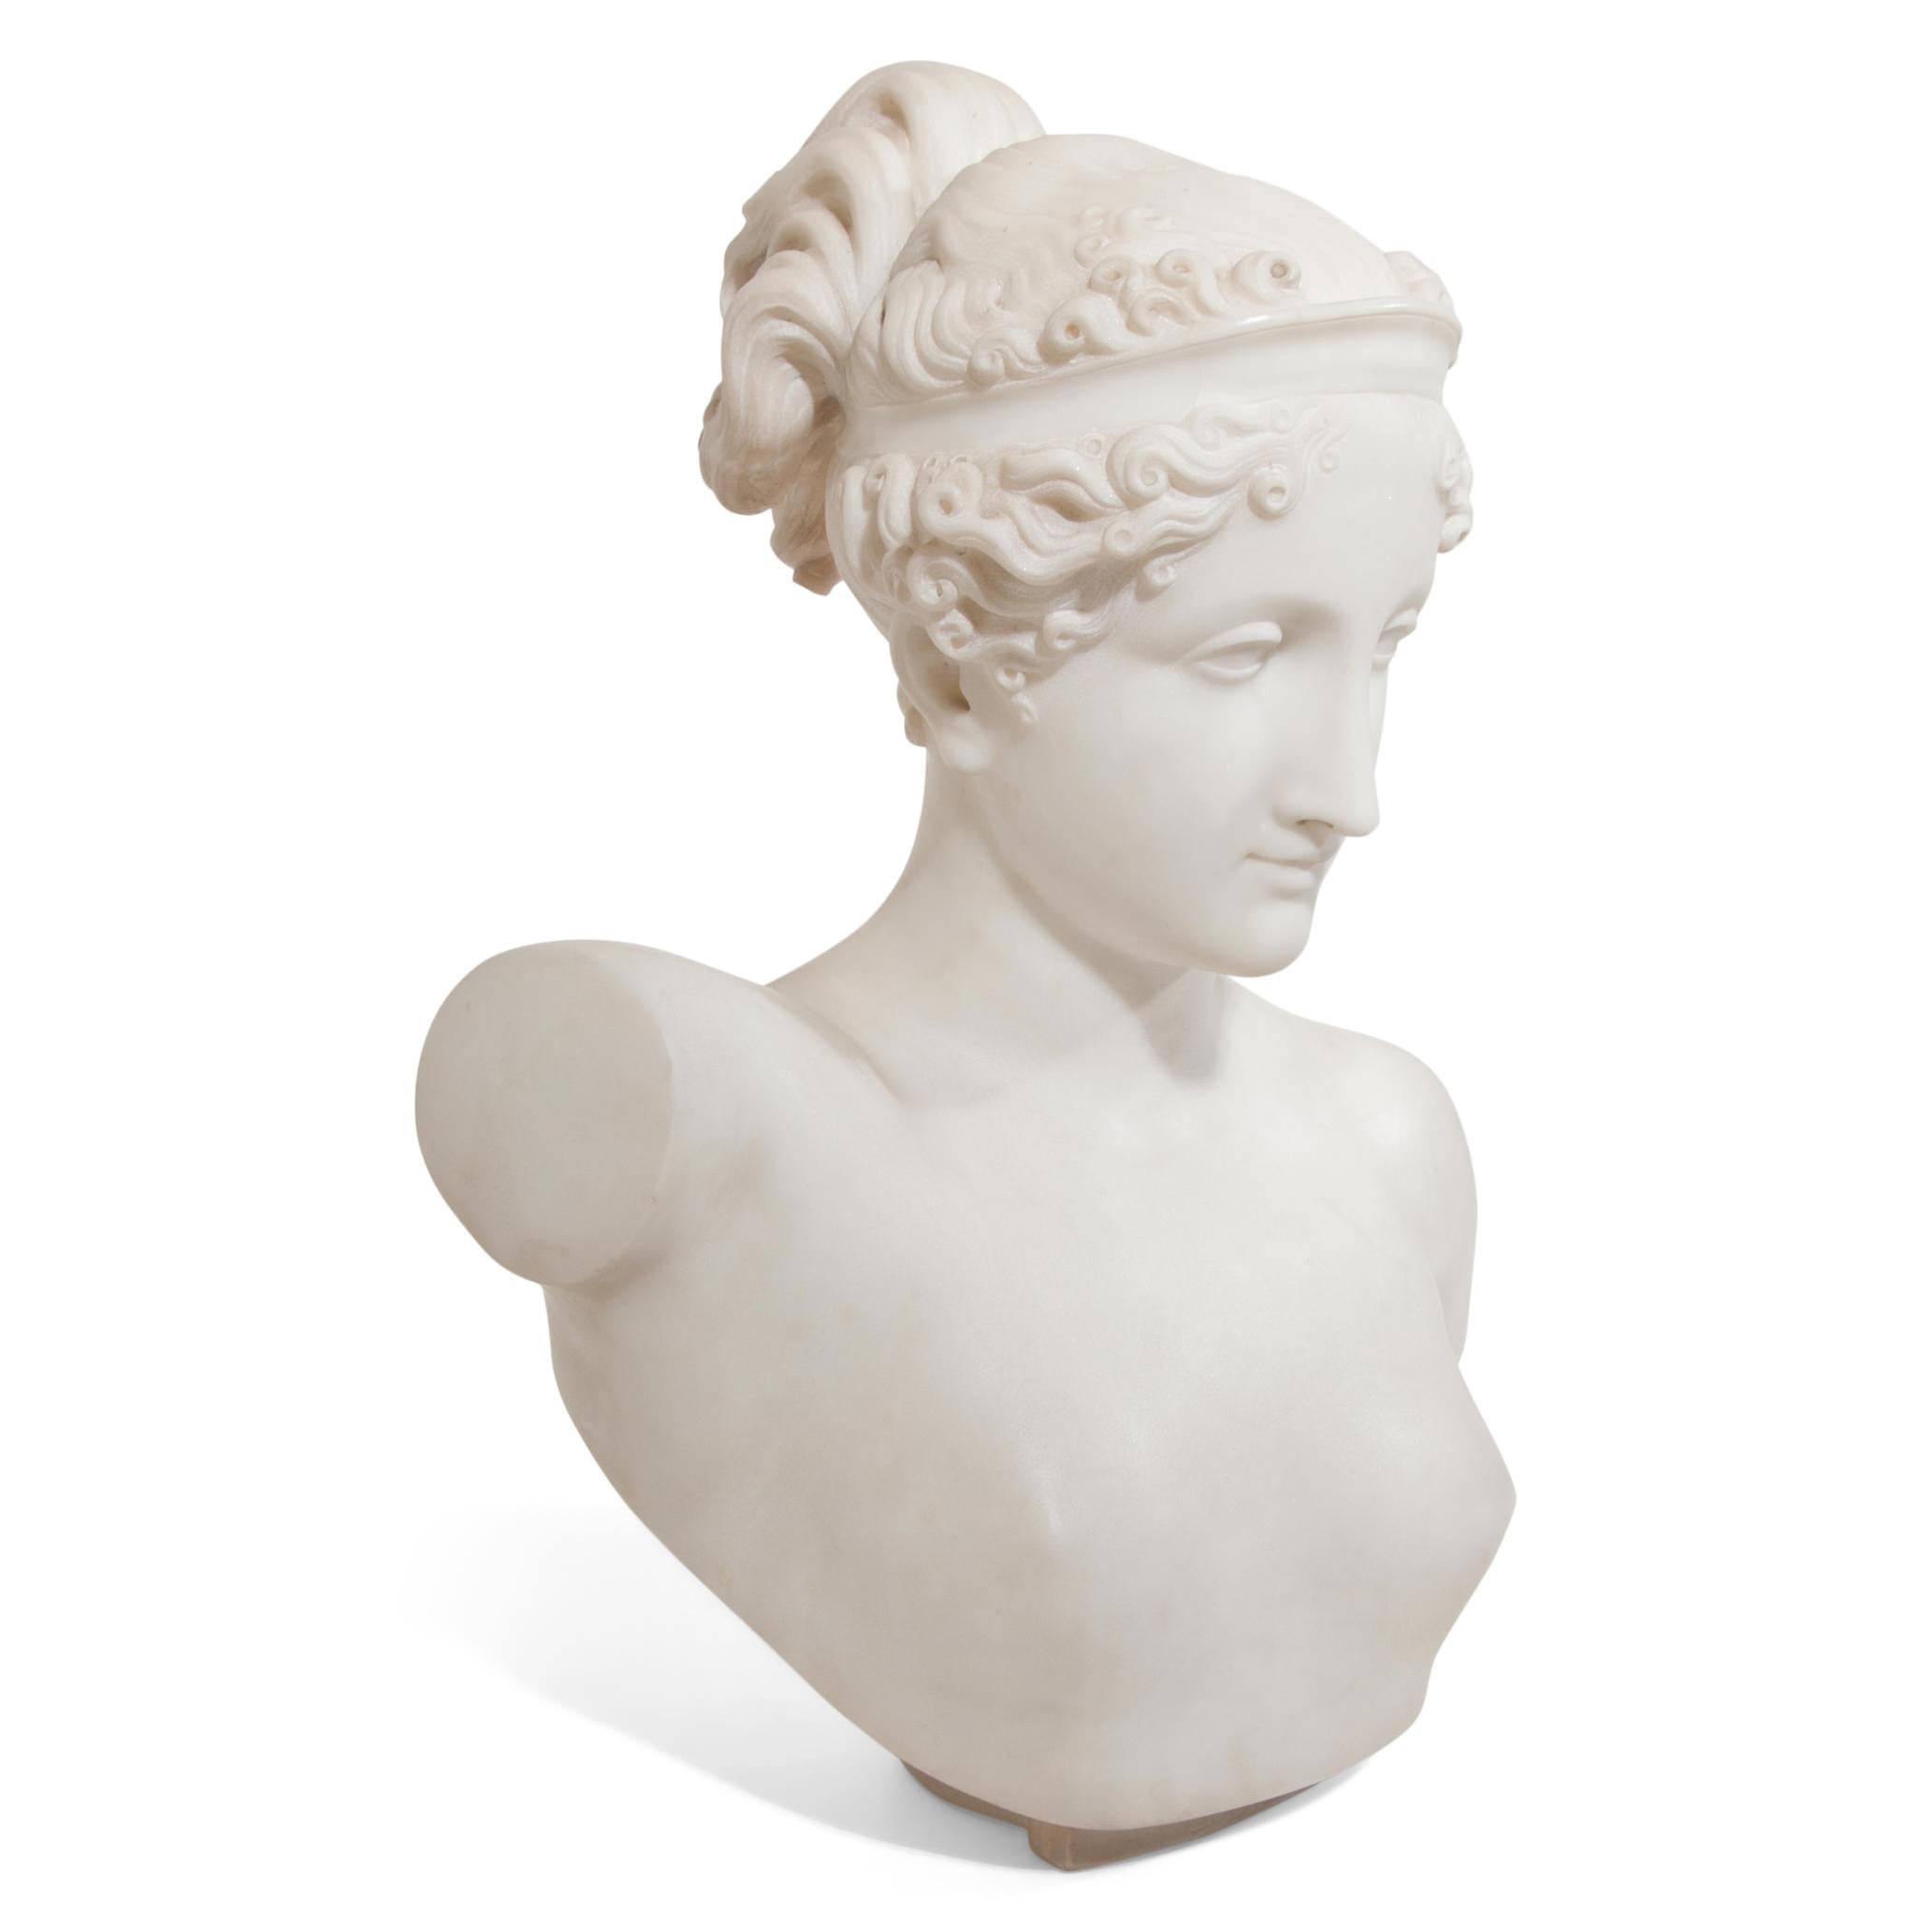 Bust of Ebe after the famous work by Canova, very beautifully carved out of marble. Inscribed at the base EBE.